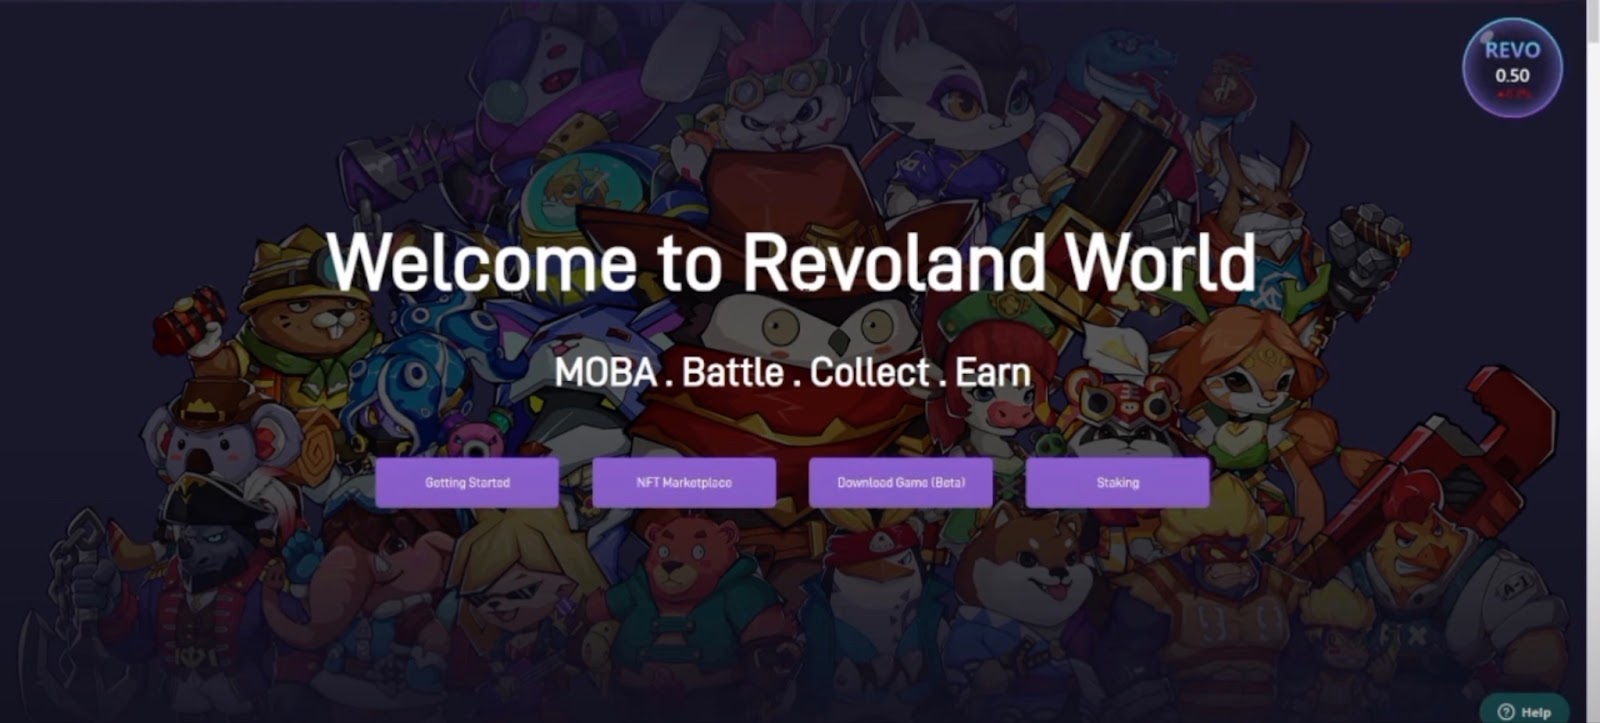 The inscription Welcome to Revoland World against the background of the game characters